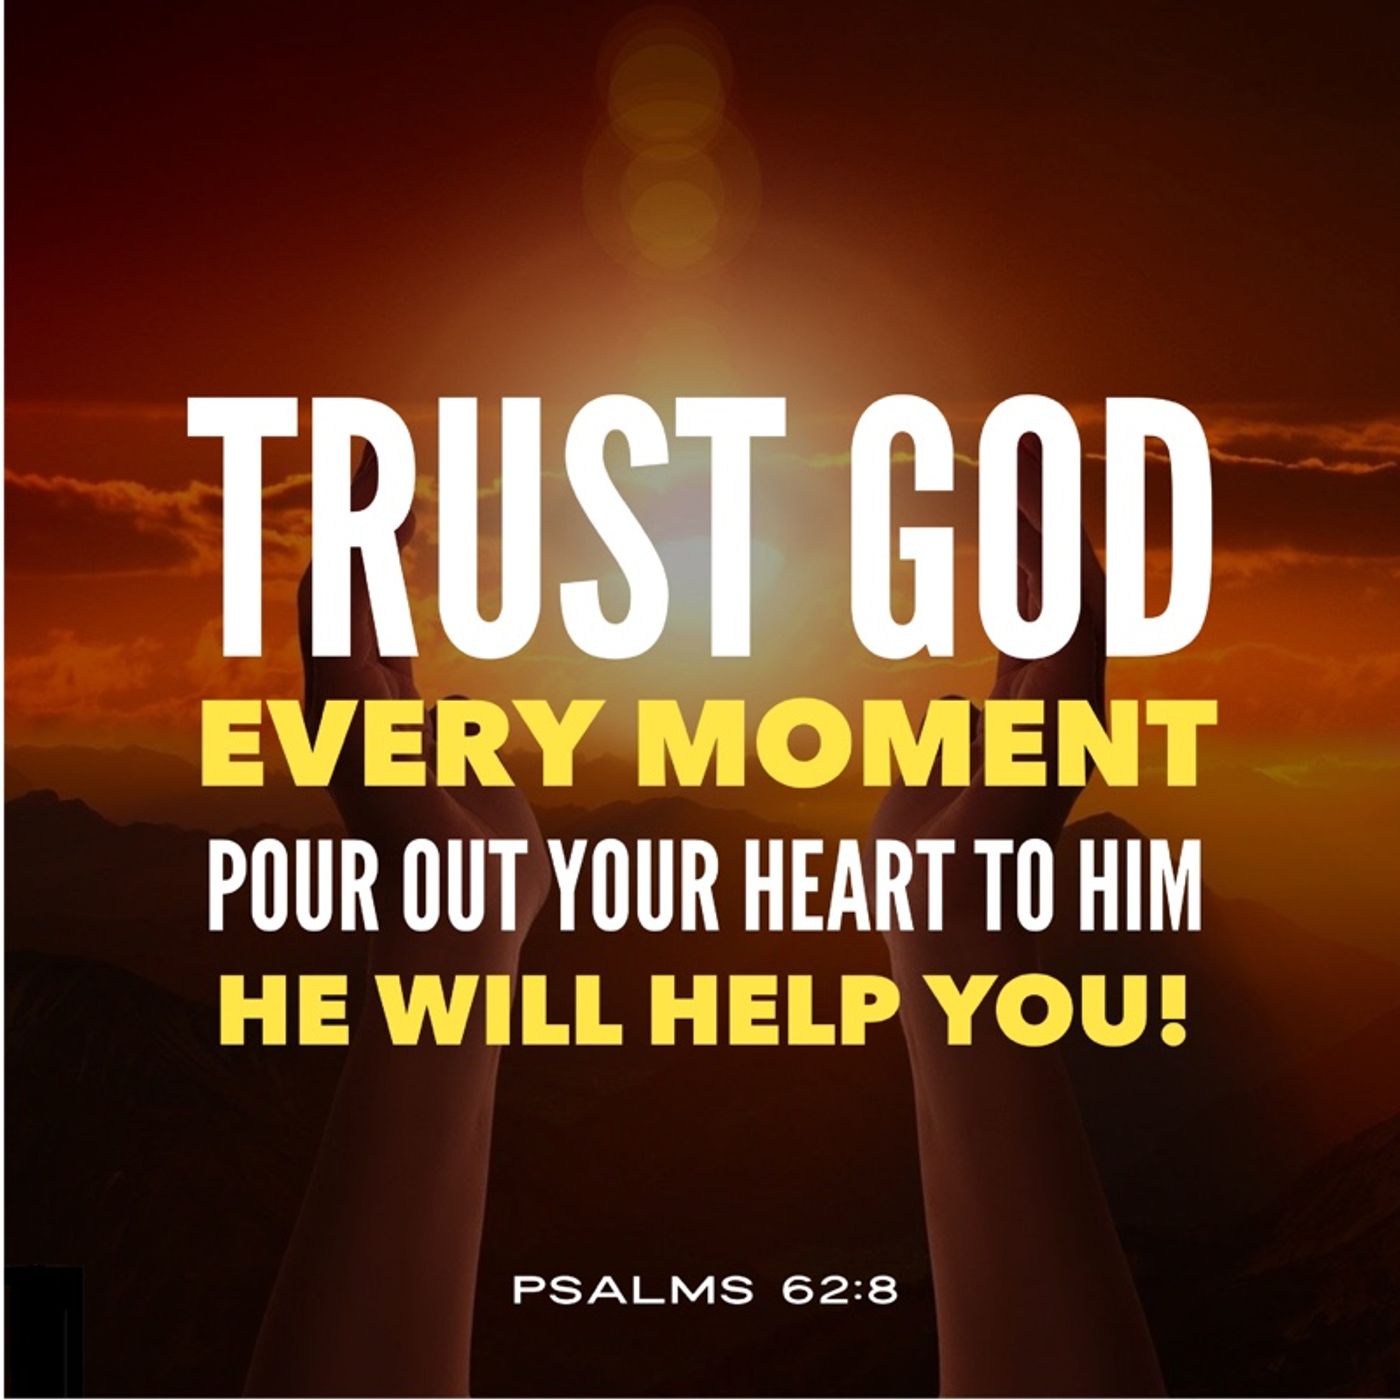 Prayer to Trust God’s Loves for You Every Moment